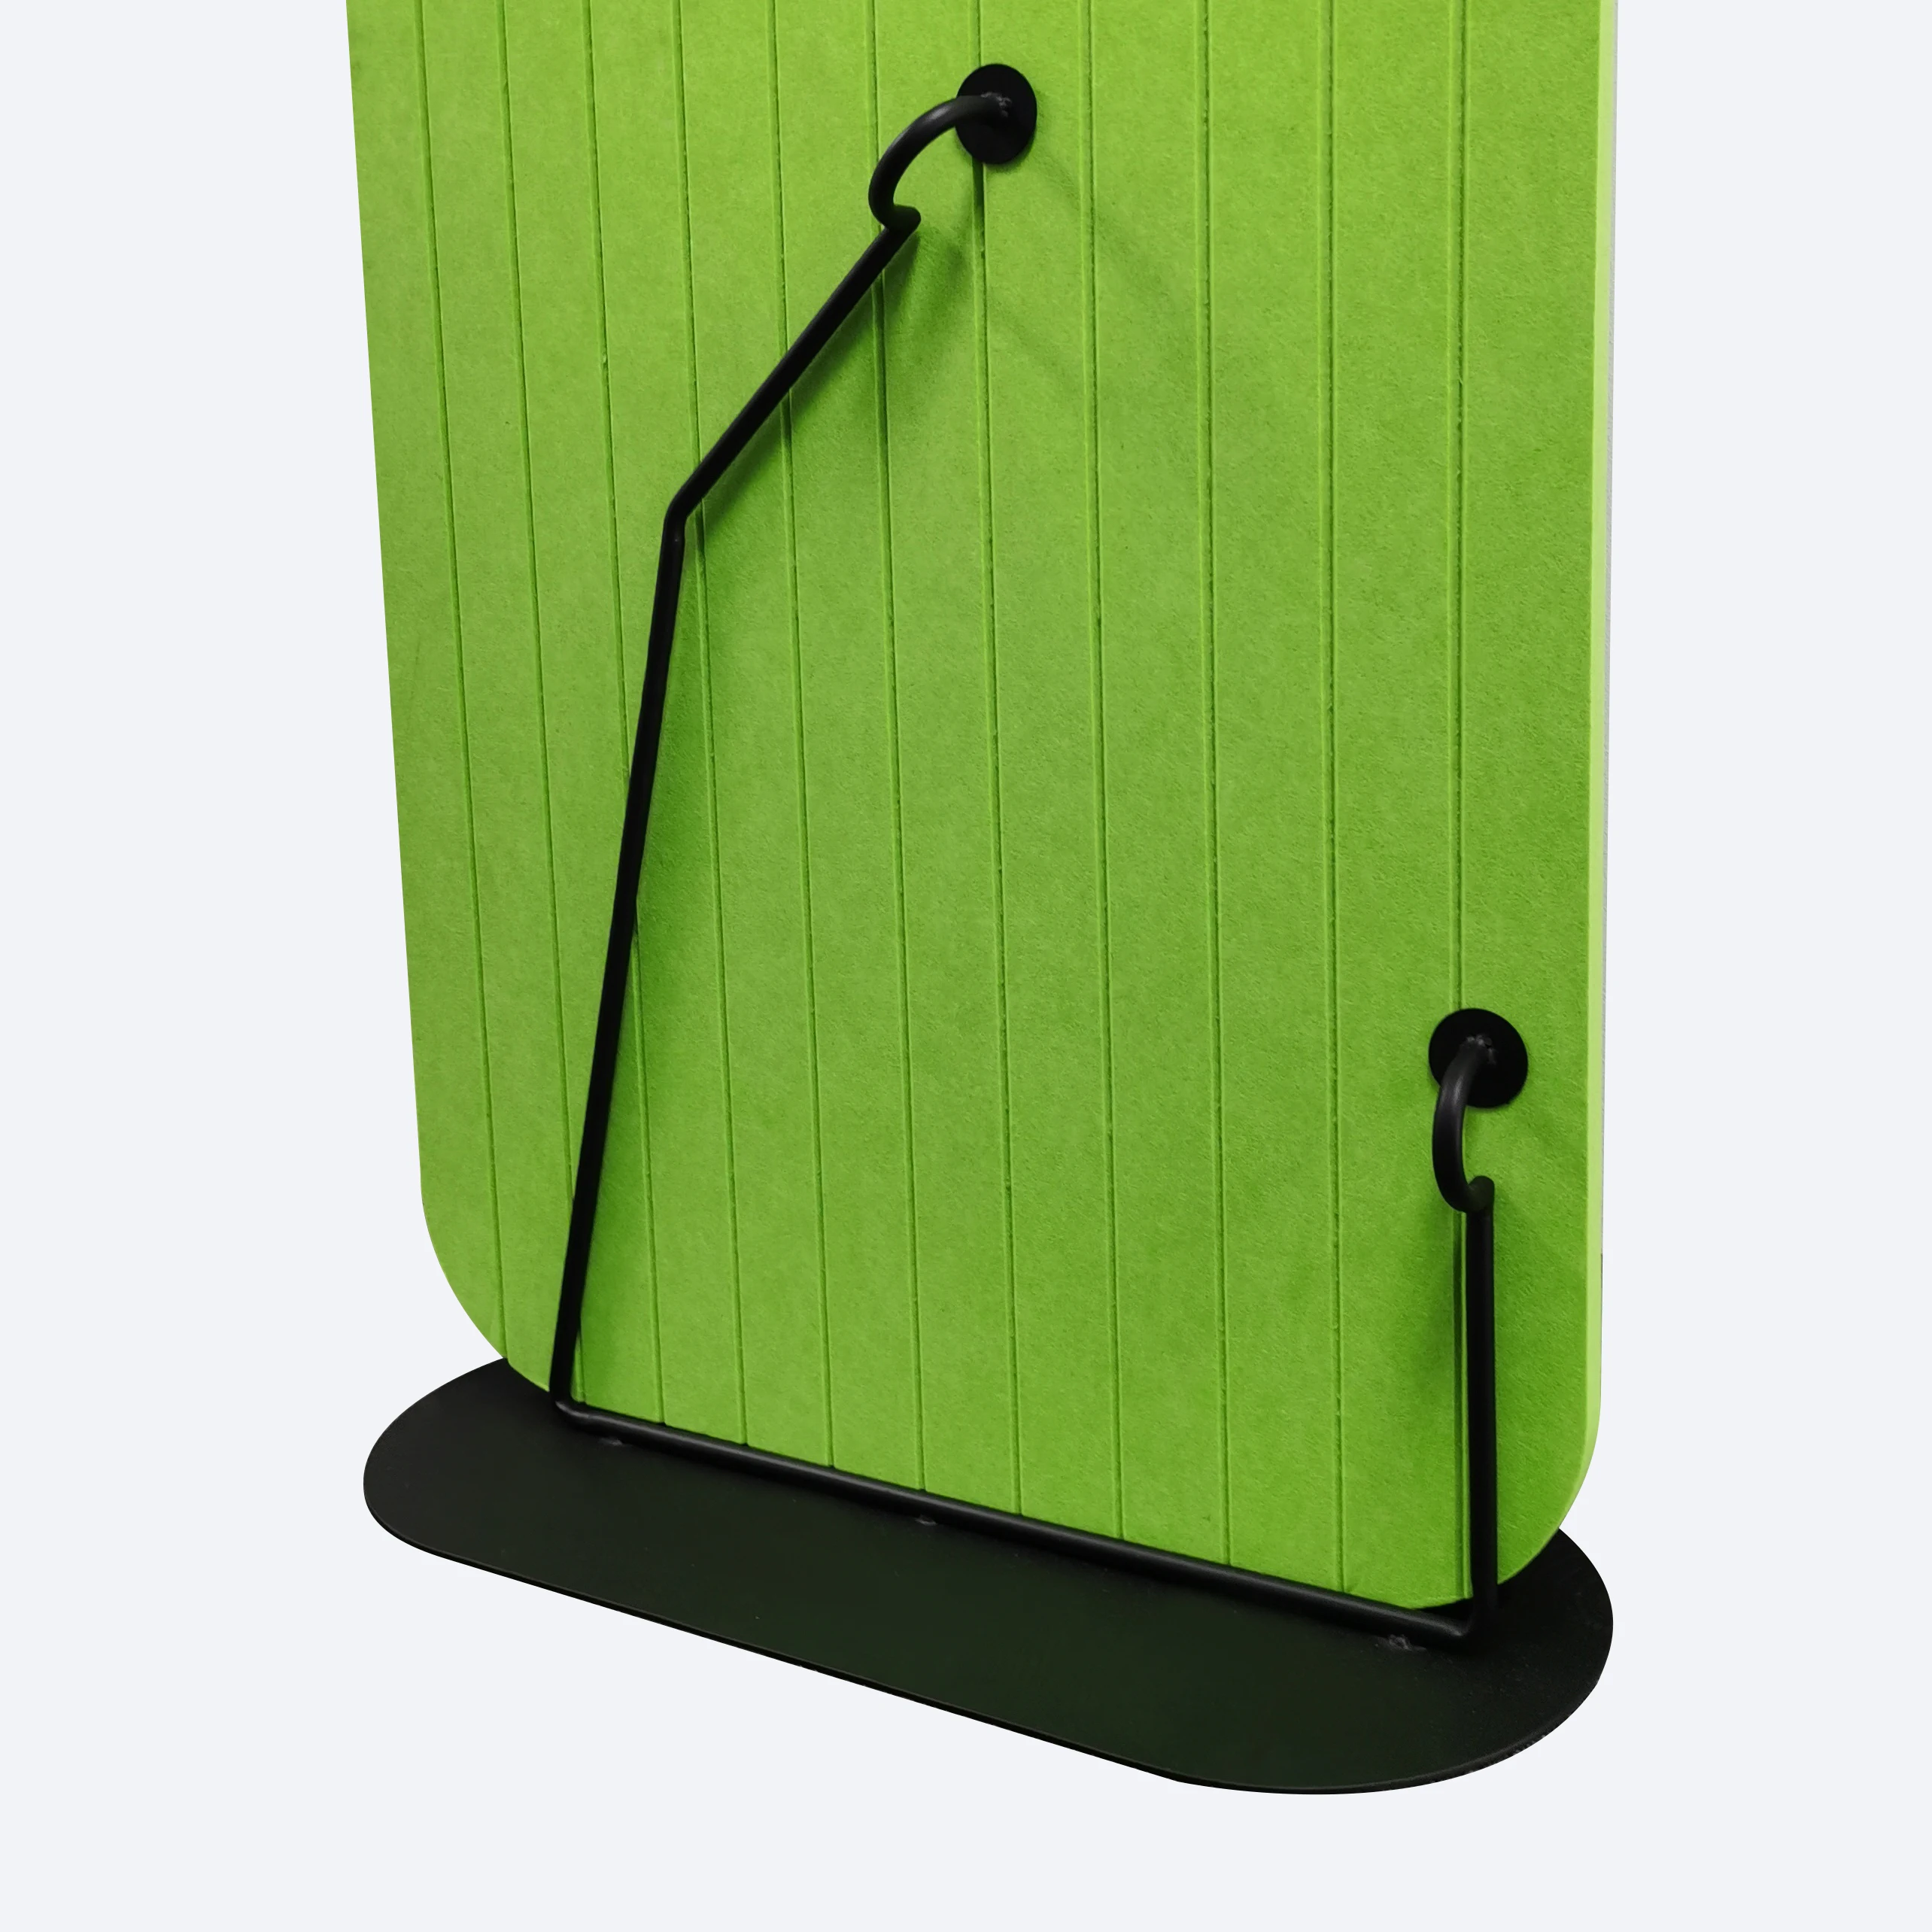 Eco-friendly Acoustic Furniture Office PET Acoustic Room Divider Fabric Wall Partition Screens Room Divider Panels